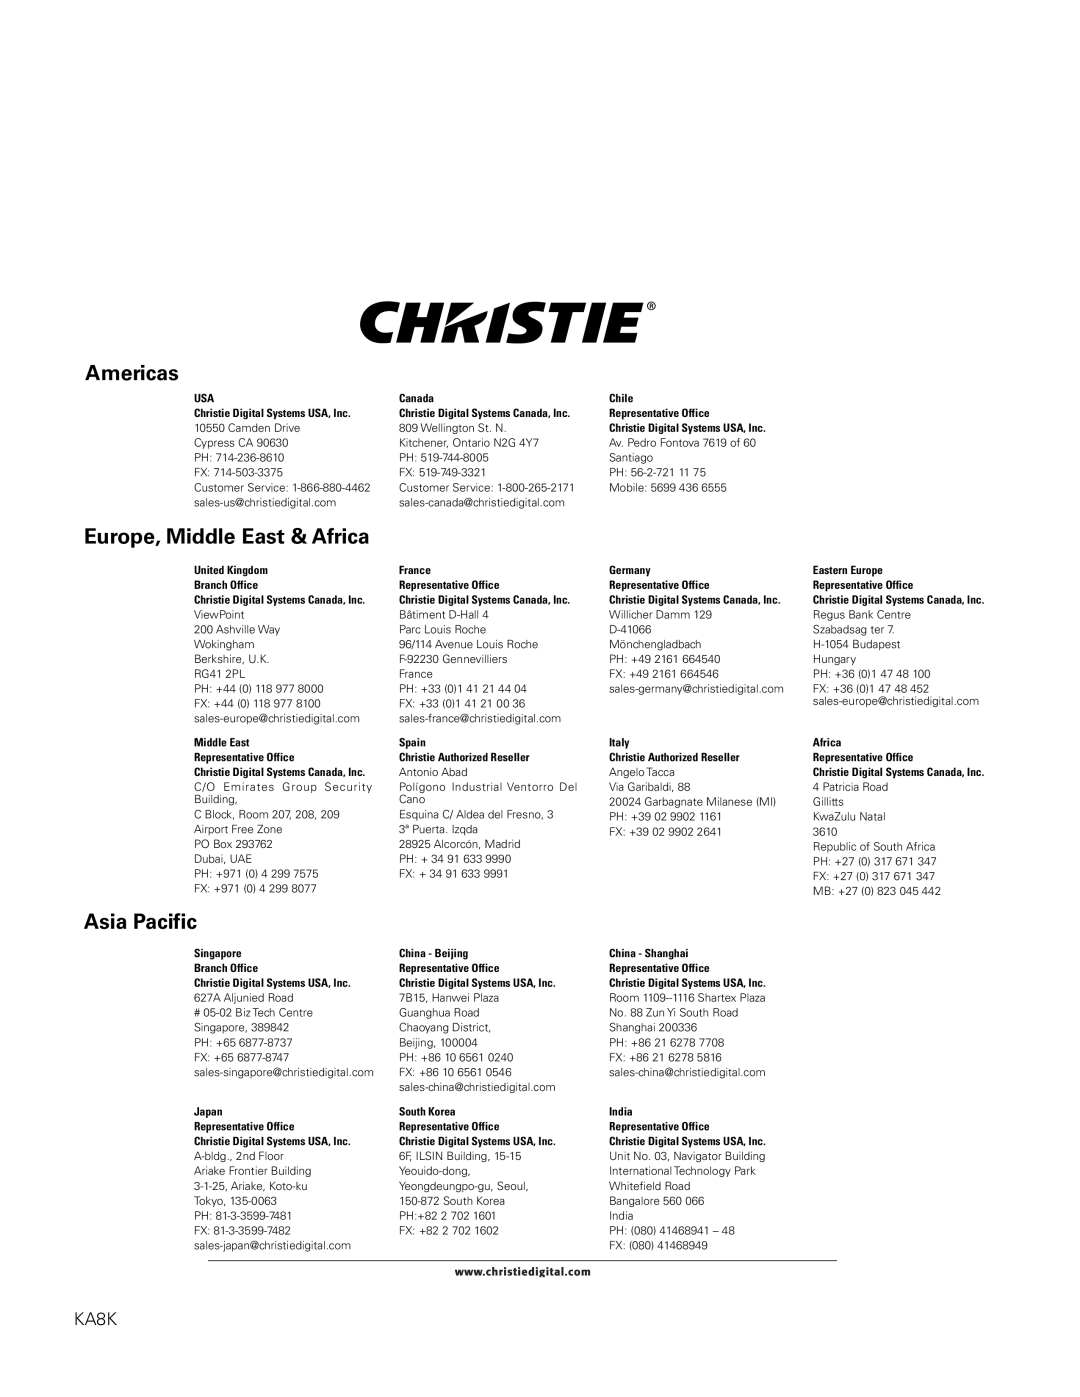 Christie Digital Systems LX605 manual Americas, Europe, Middle East & Africa, Asia Pacific, KA8K 